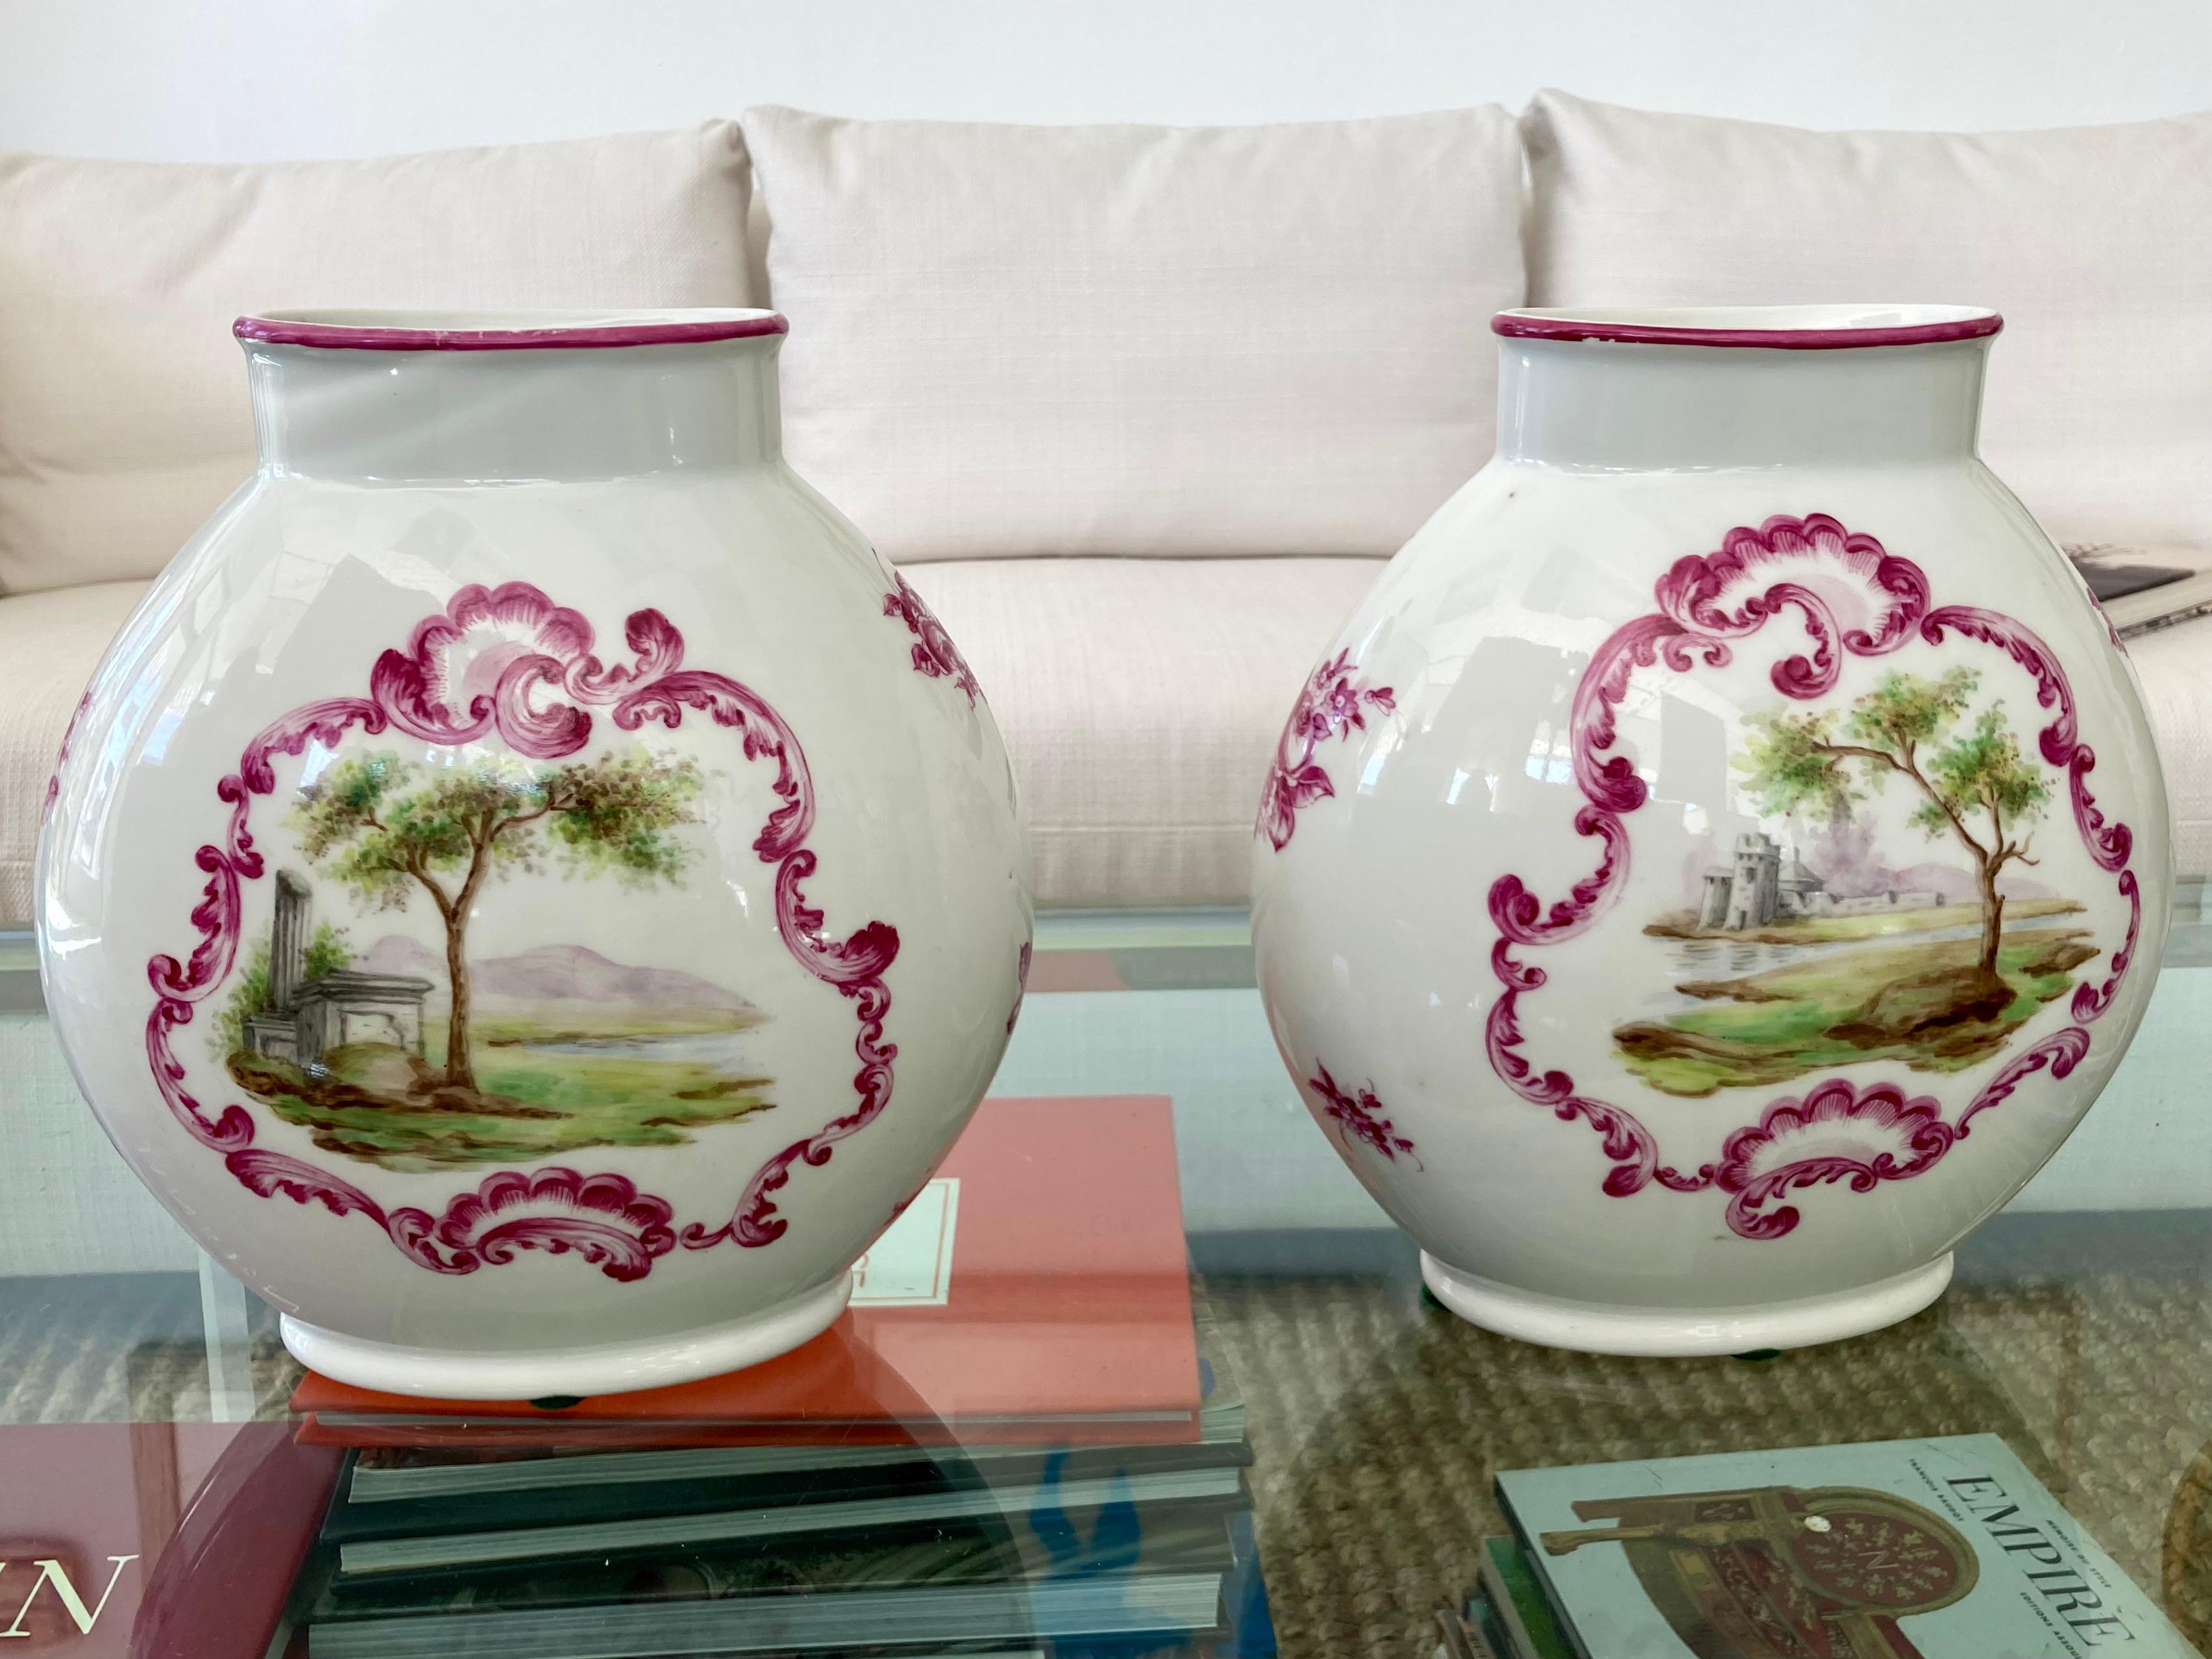 French 19th Century pair of porcelain oval vases with decorative hand painted landscape scenes. Beautiful pink hand painted details and a true pair!